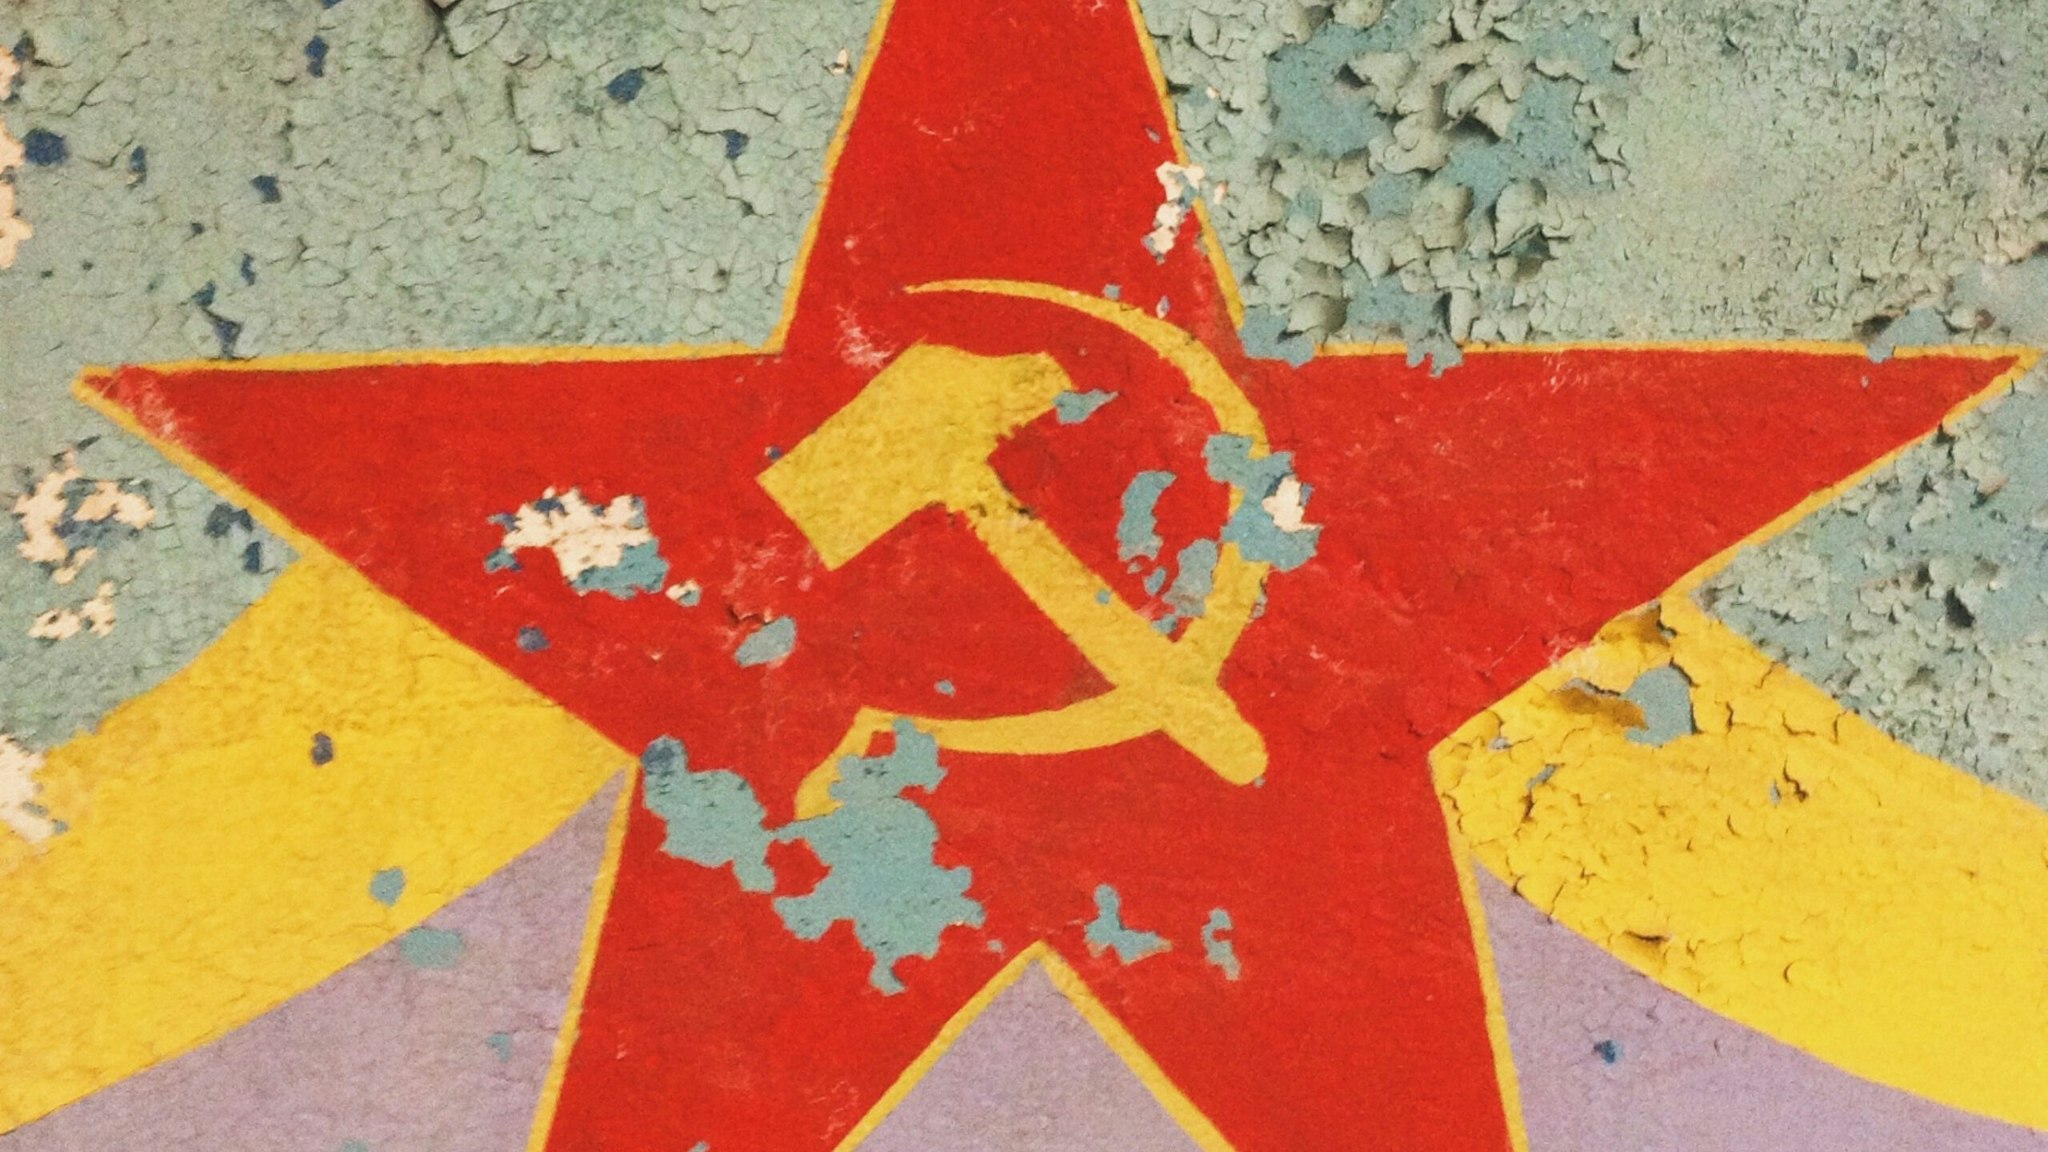 Hammer and sickle.